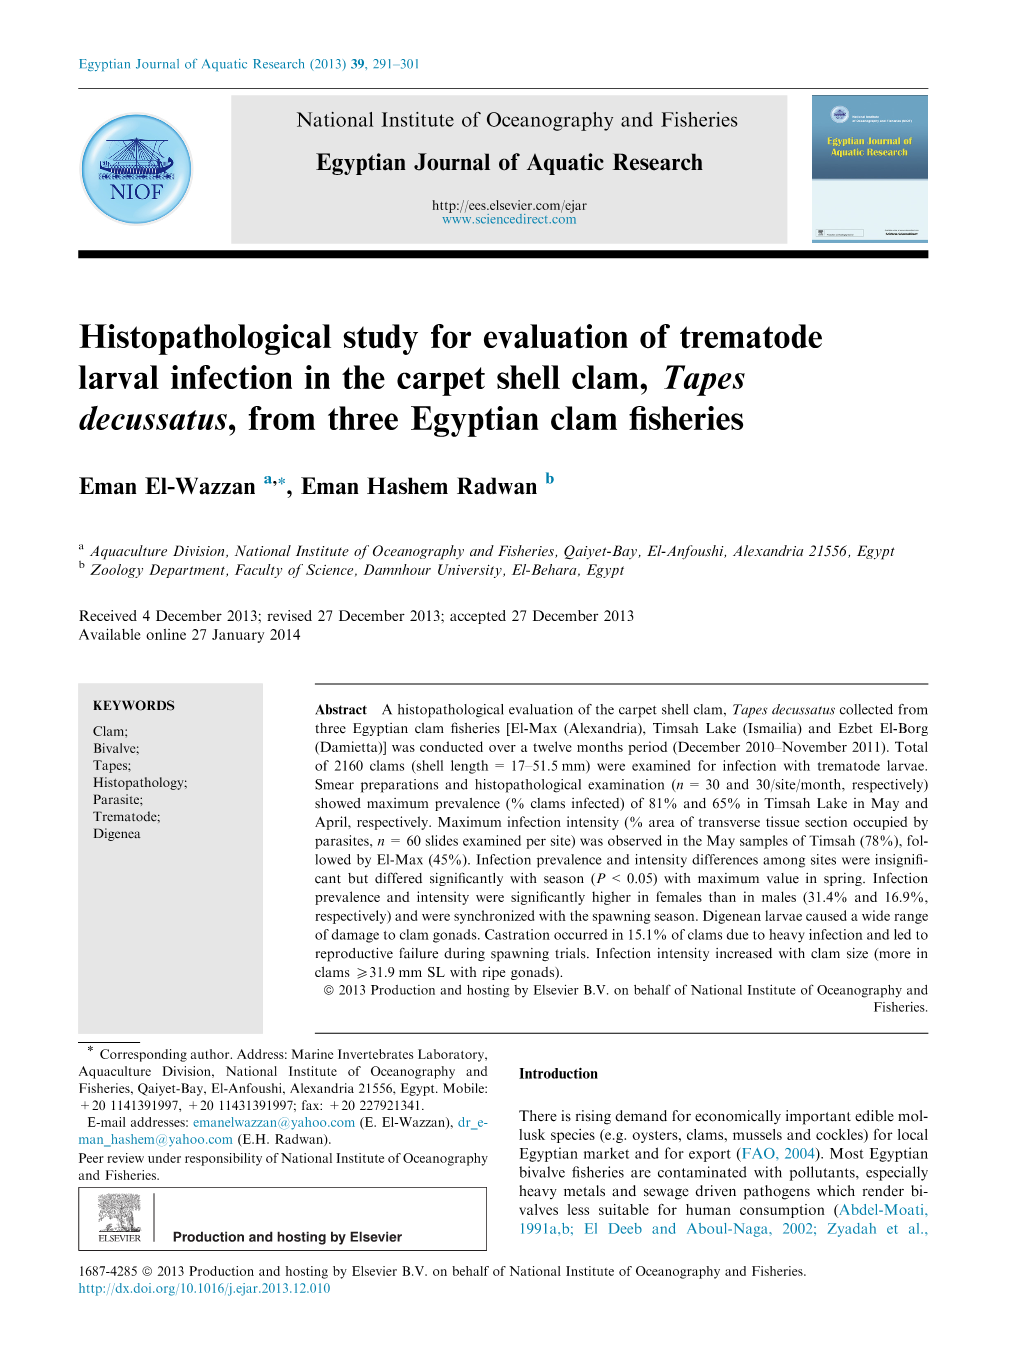 Histopathological Study for Evaluation of Trematode Larval Infection in the Carpet Shell Clam, Tapes Decussatus, from Three Egyptian Clam ﬁsheries